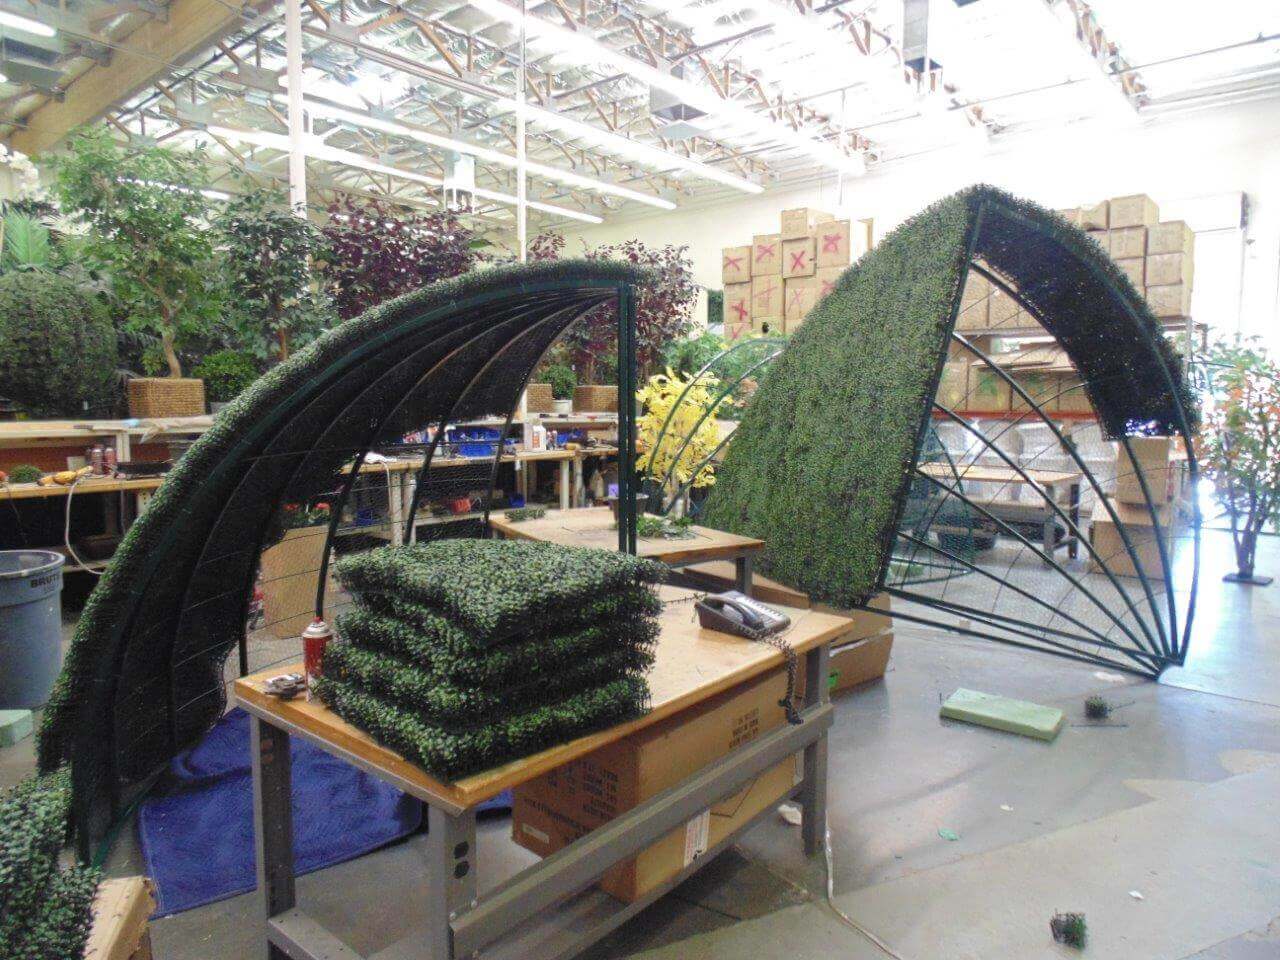 The 15-foot diameter canopy of the Boxwood topiary tree for Aria Resort & Casino under construction 2